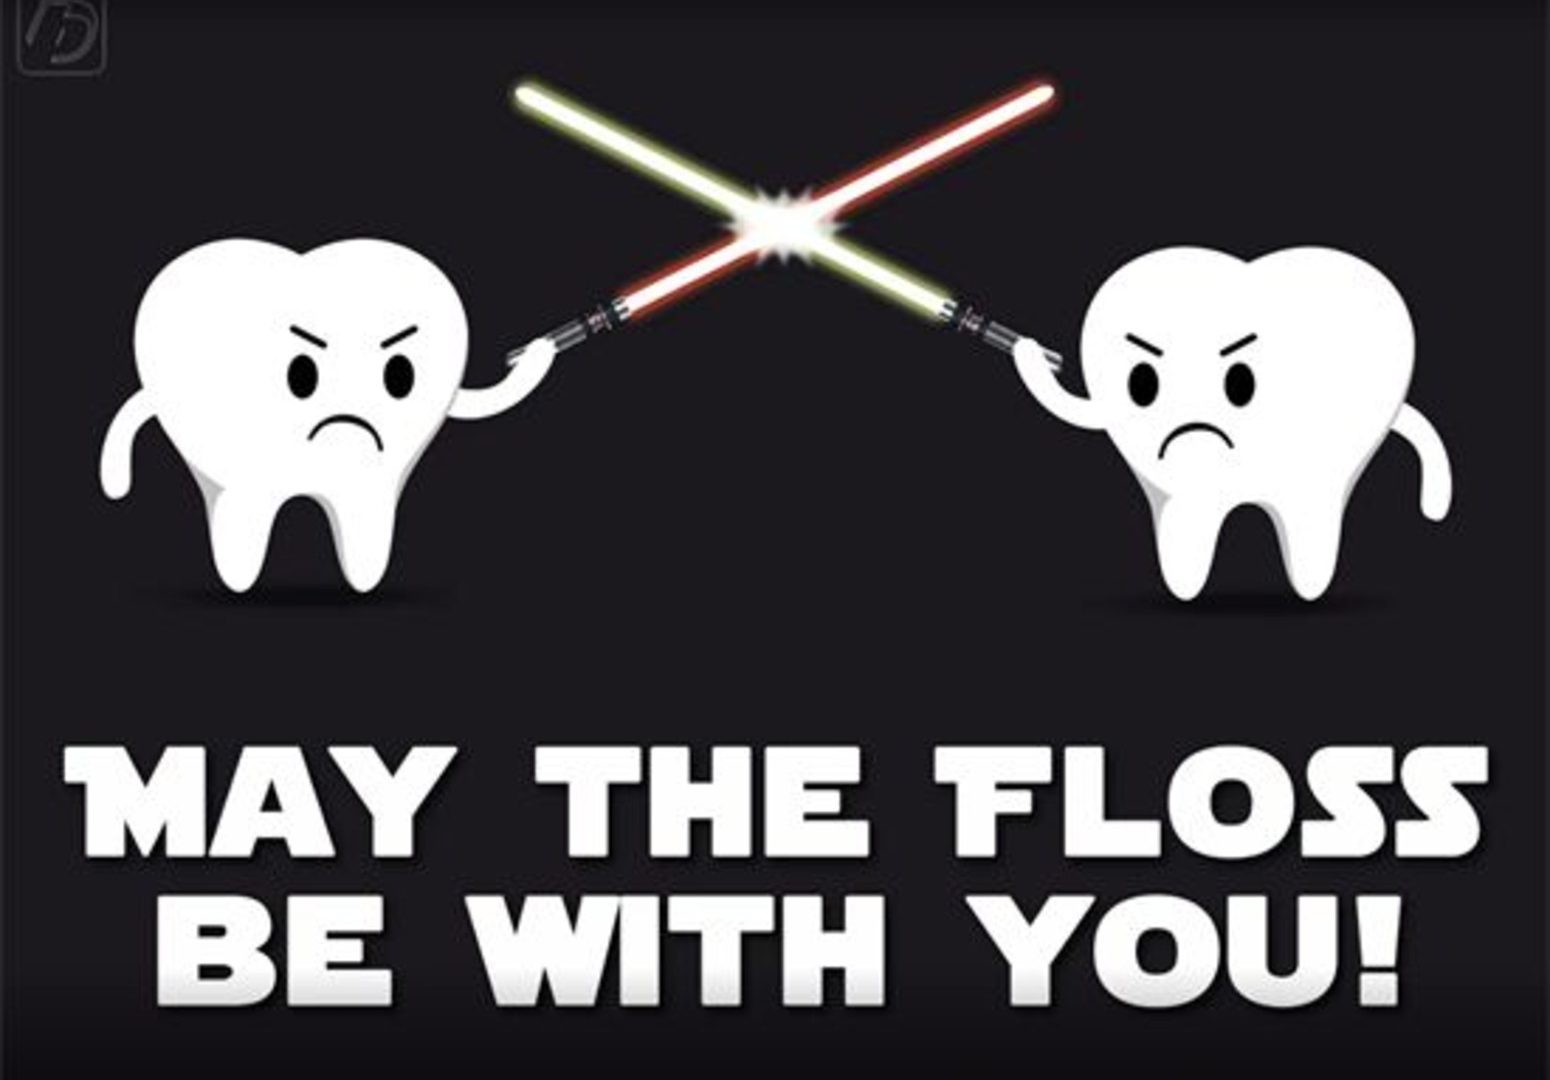 Two teeth fighting with light sabers, captioned "May the floss be with you!"